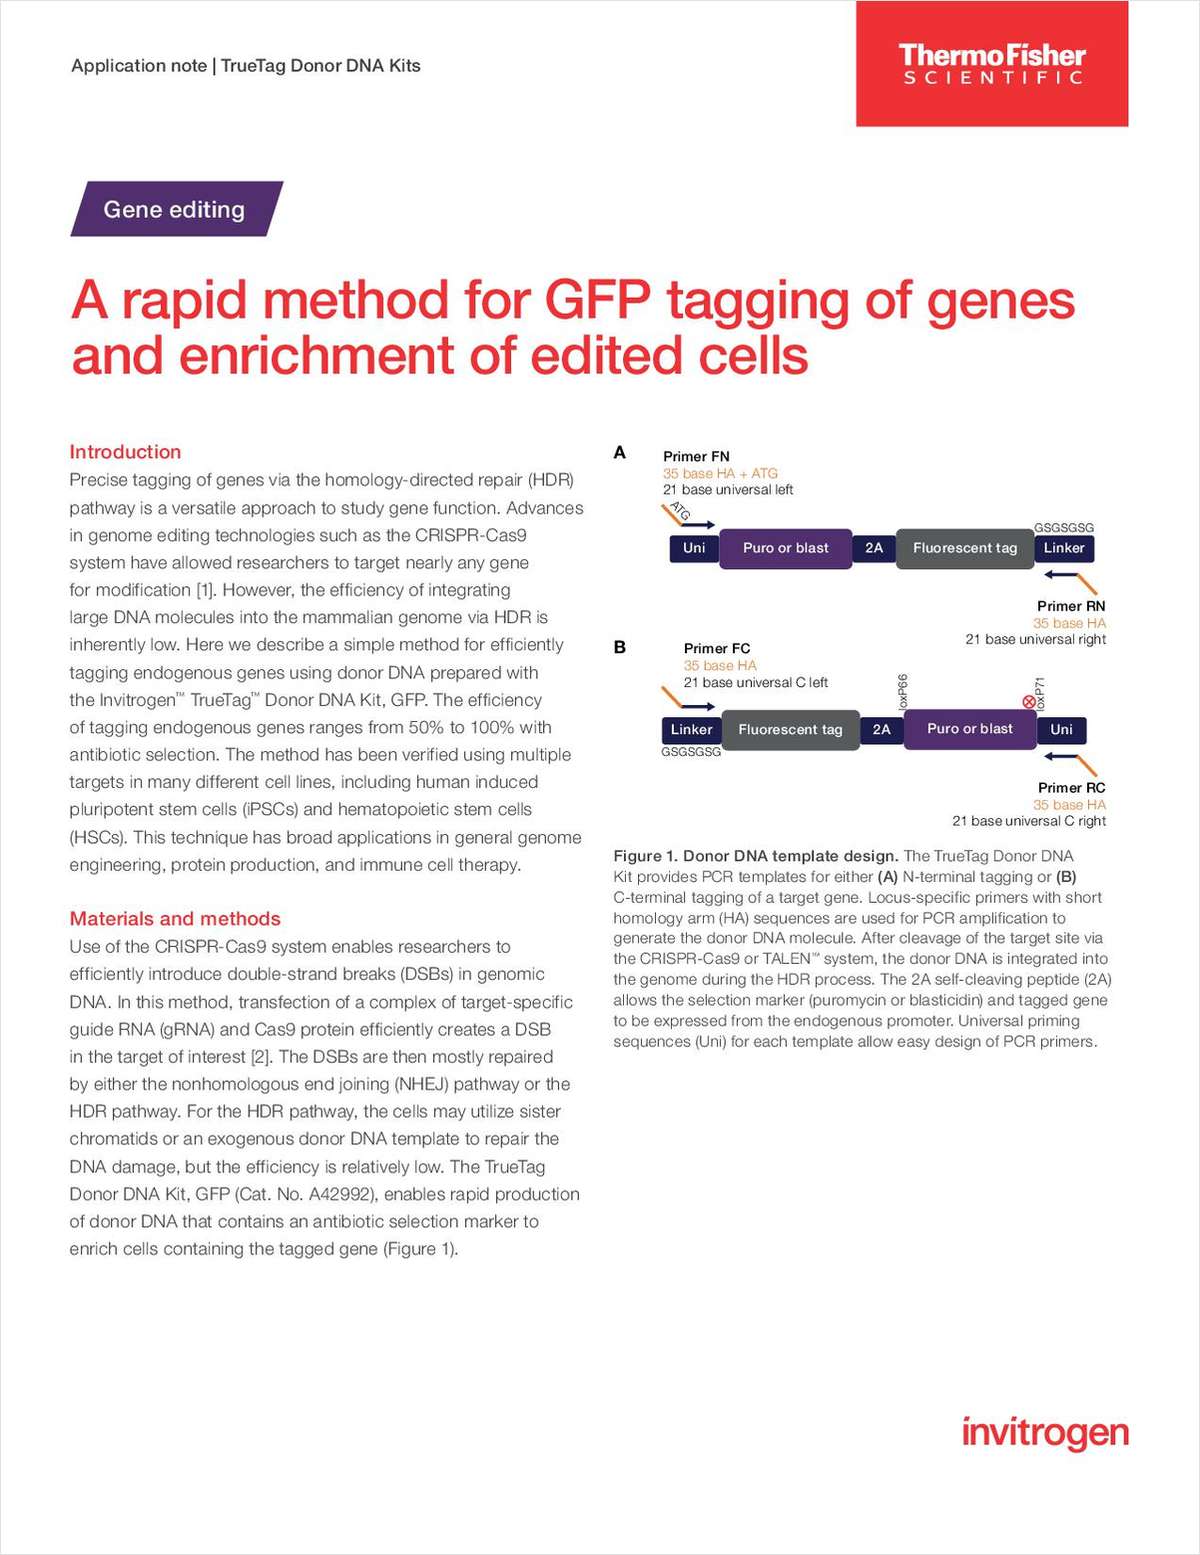 A Rapid Method for GFP Tagging of Genes and Enrichment of Edited Cells